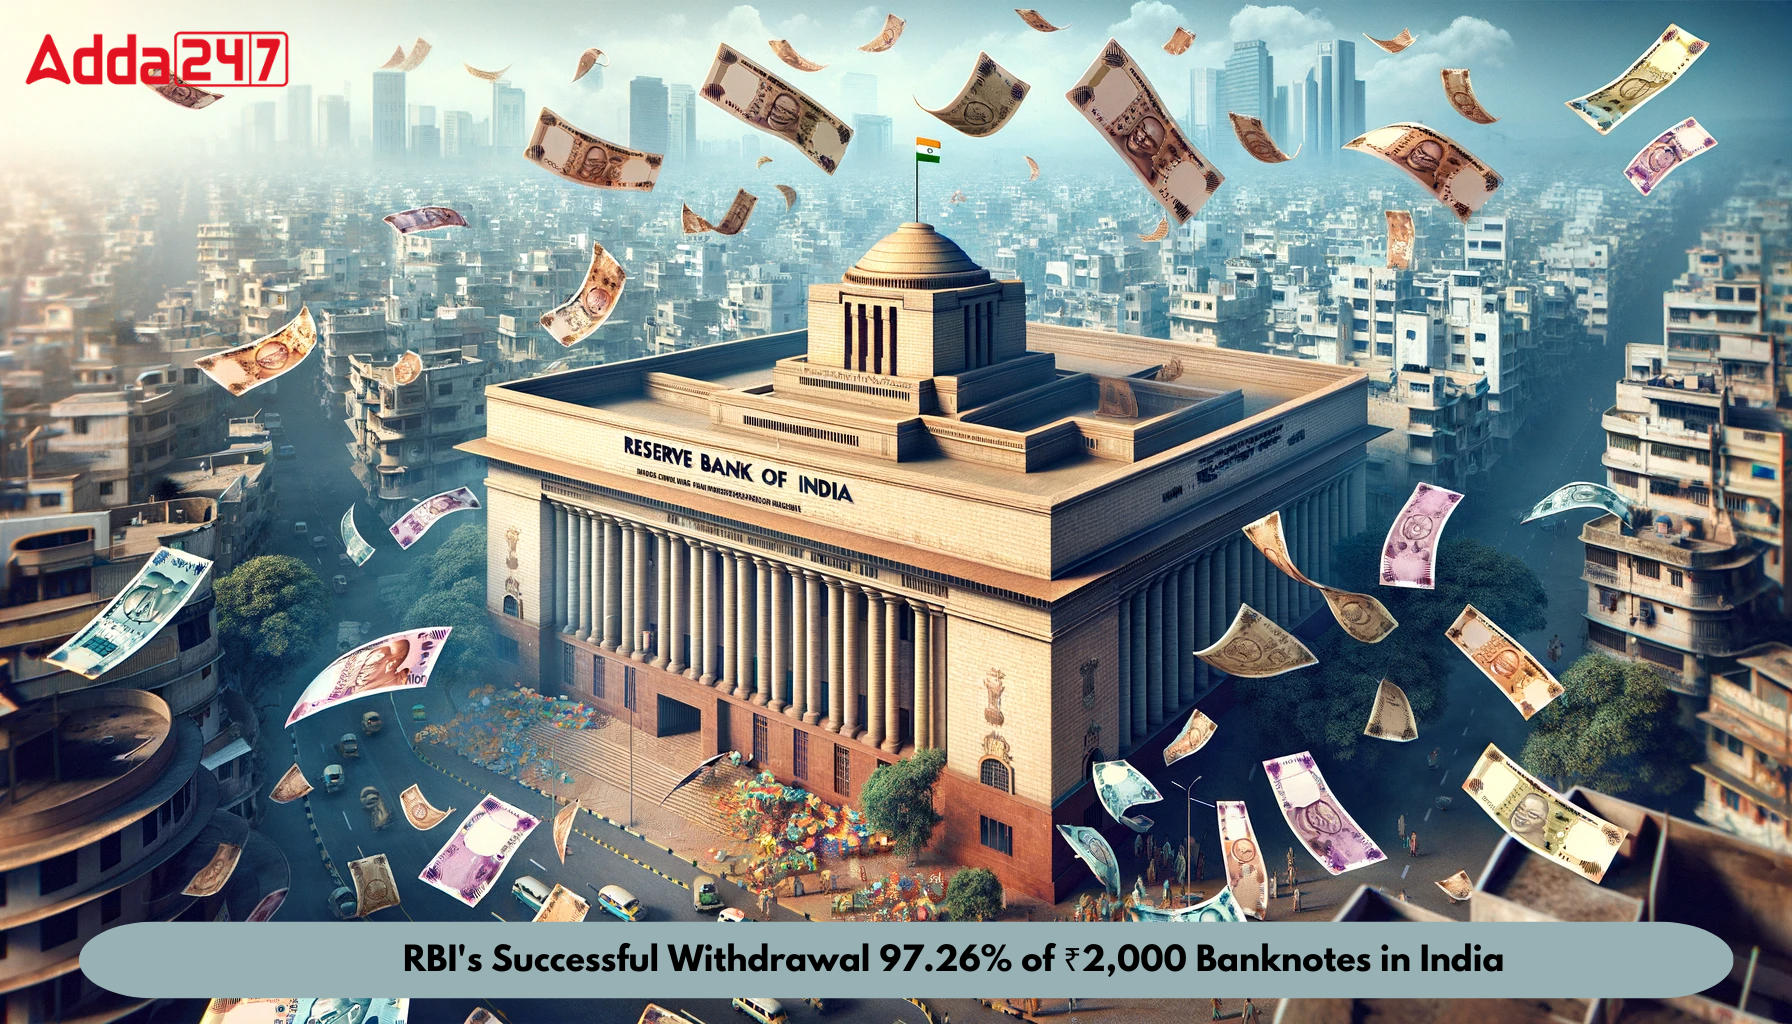 RBI's Successful Withdrawal 97.26% of ₹2,000 Banknotes in India